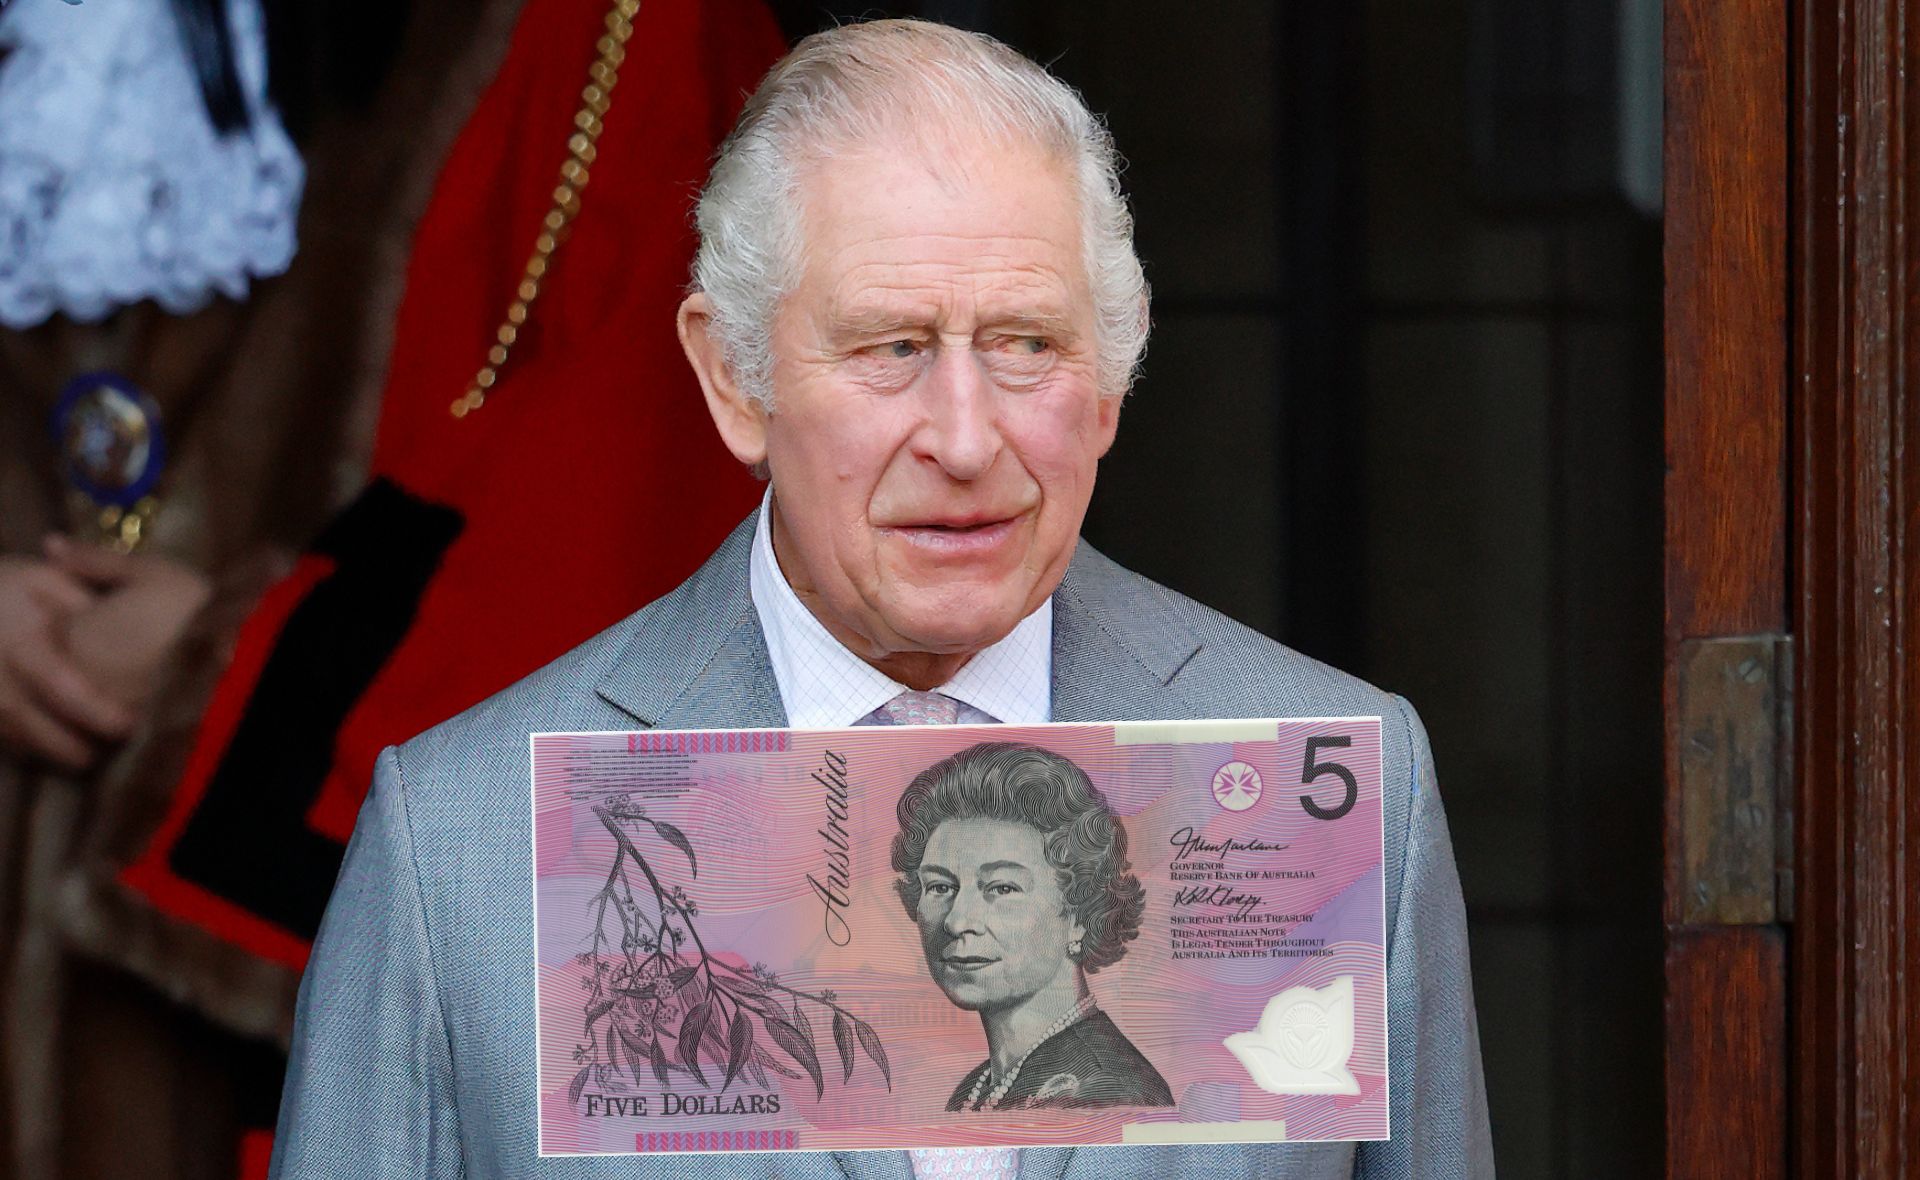 King Charles won’t replace Queen Elizabeth on Australian $5 note